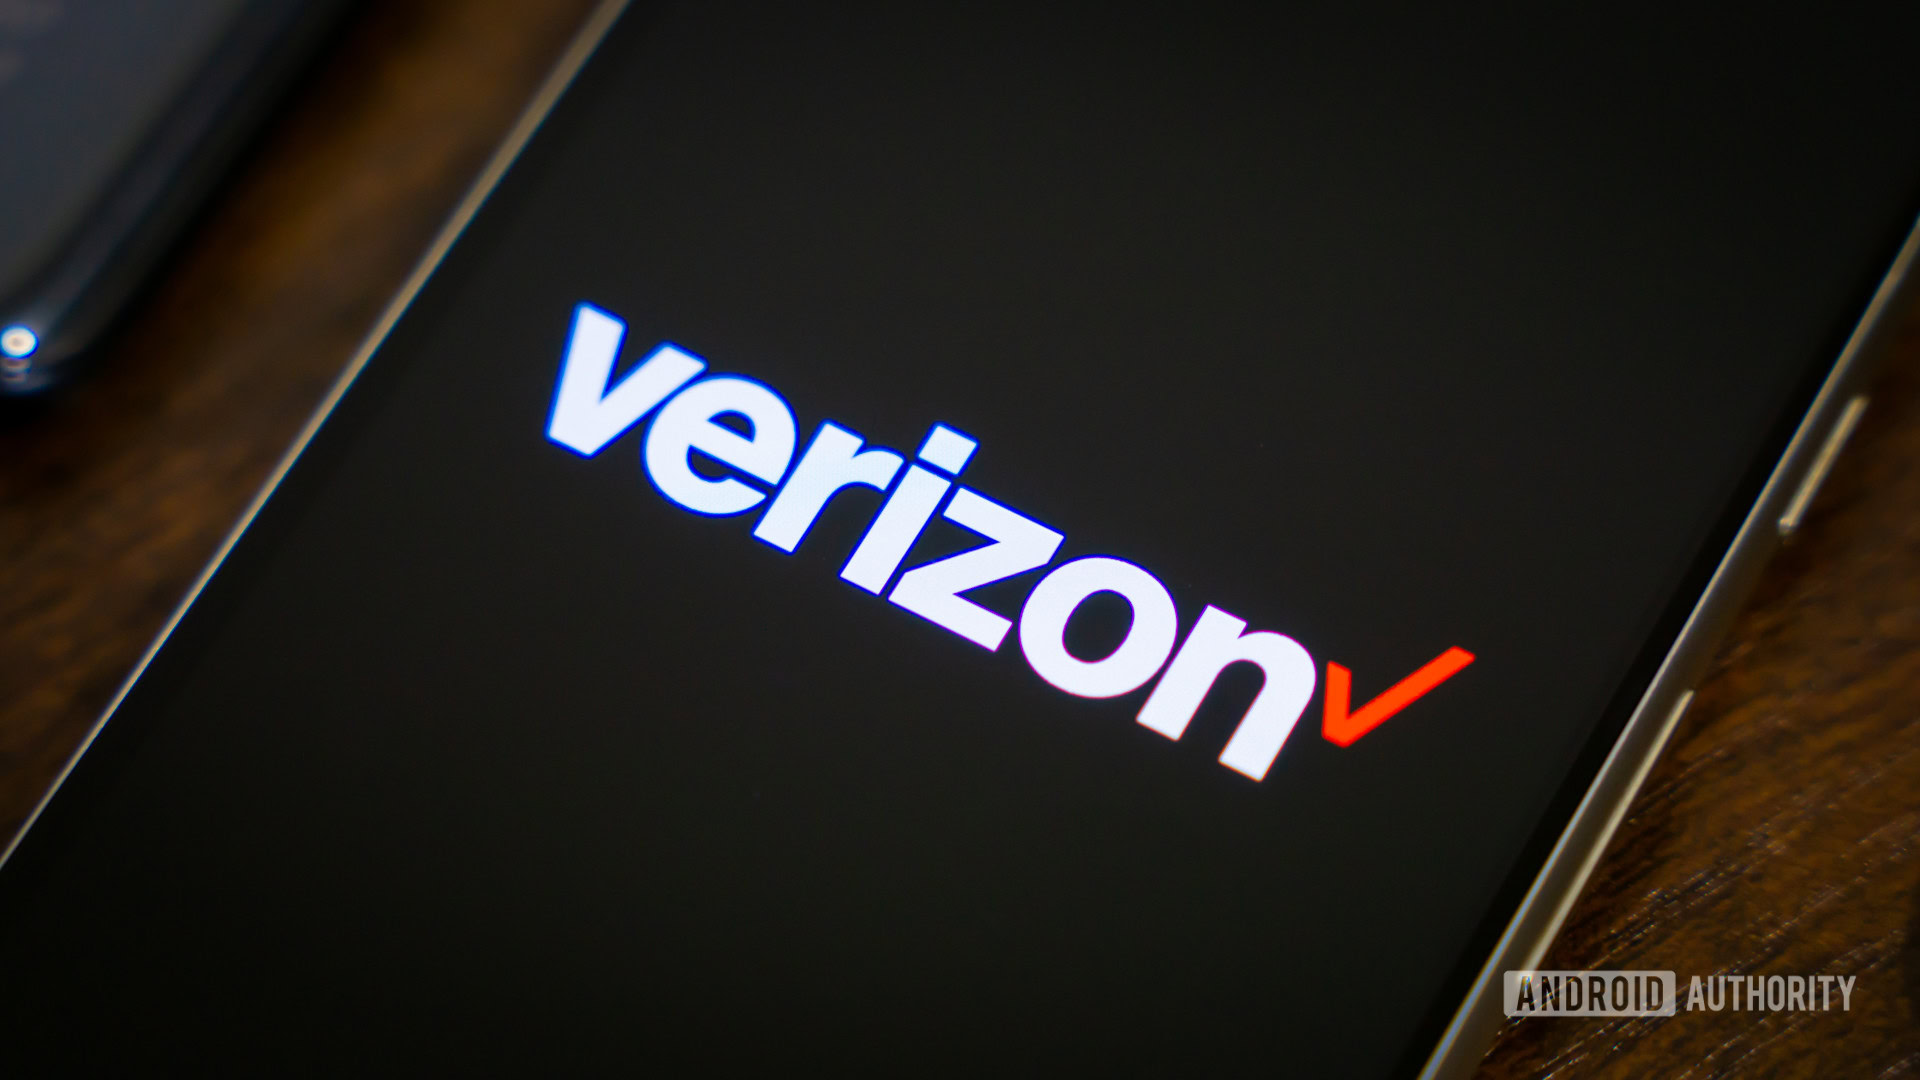 Verizon logo on smartphone, next to other devices (2)